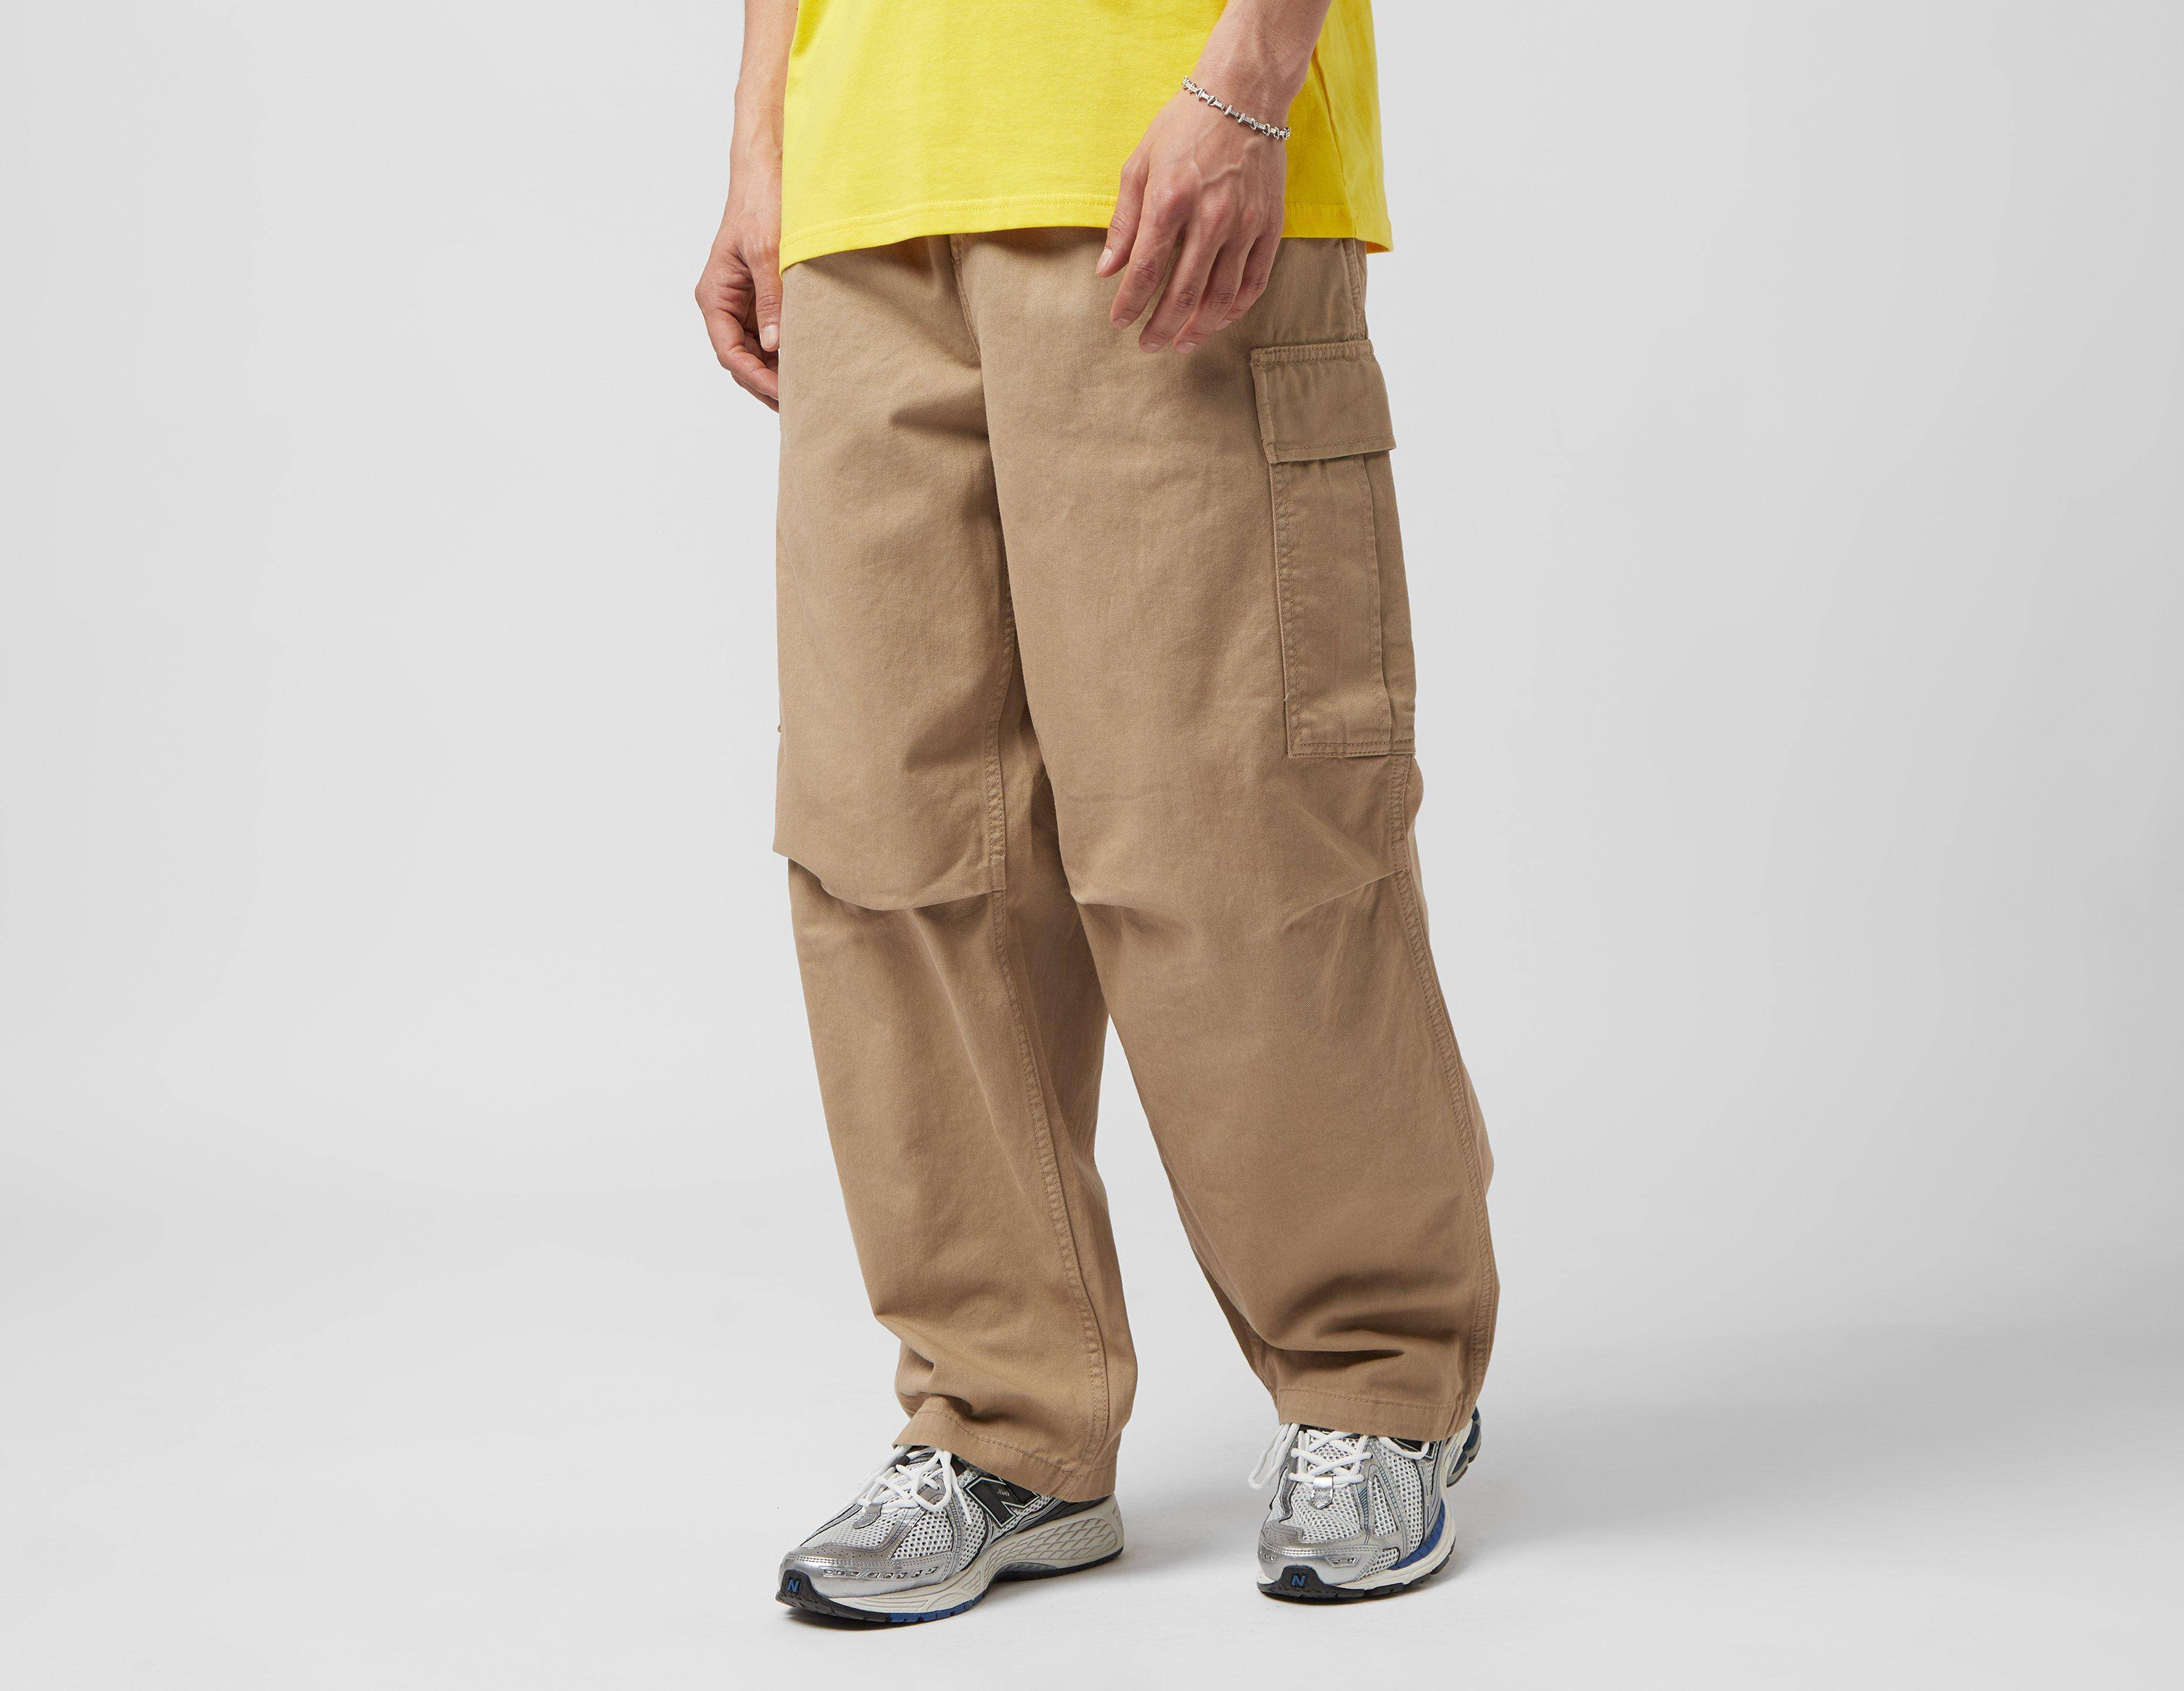 Carhartt WIP – Cole Cargo Pant Brown